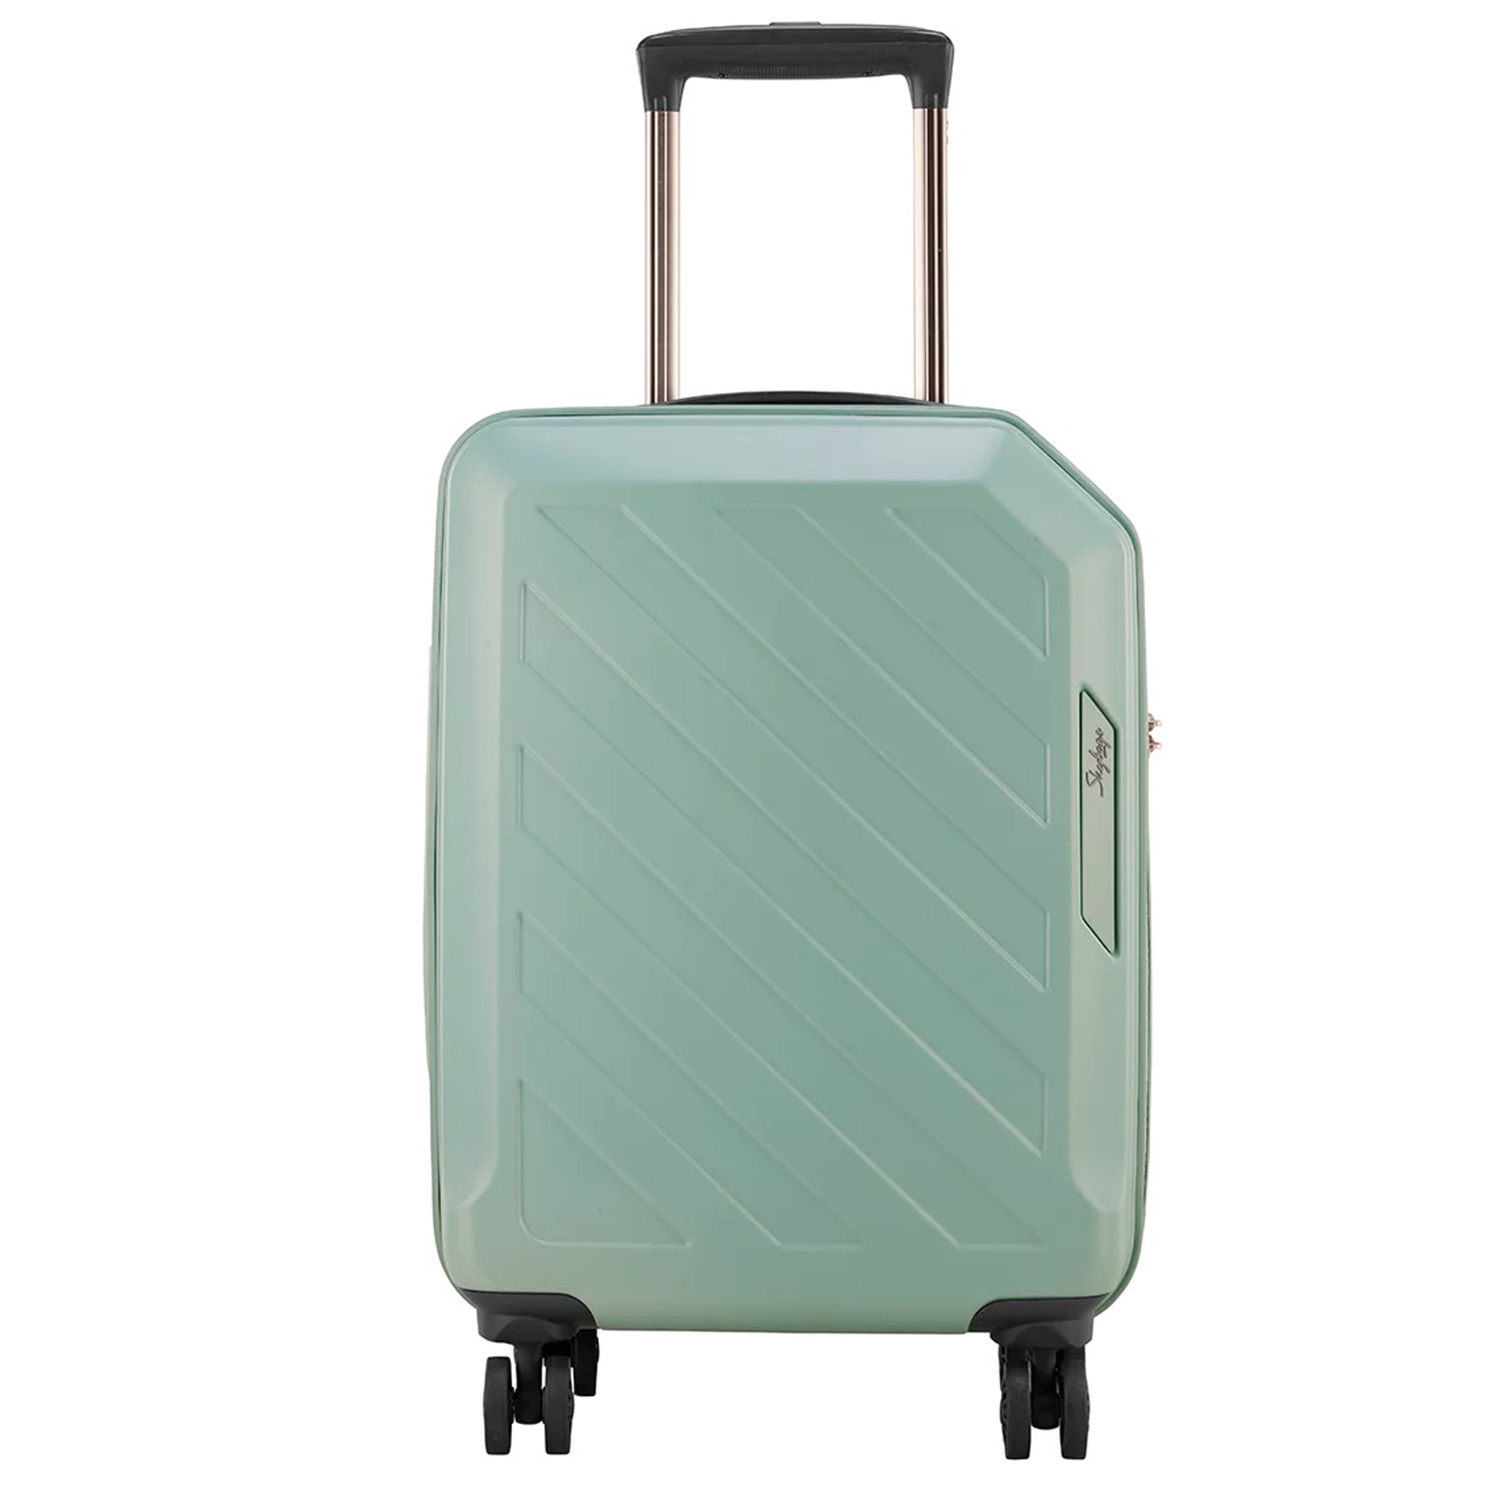 RoshanBags_SKYBAGS DUAL 4 WHEEL JERRYCAN POLYCORBONATE STROLLY GREEN 